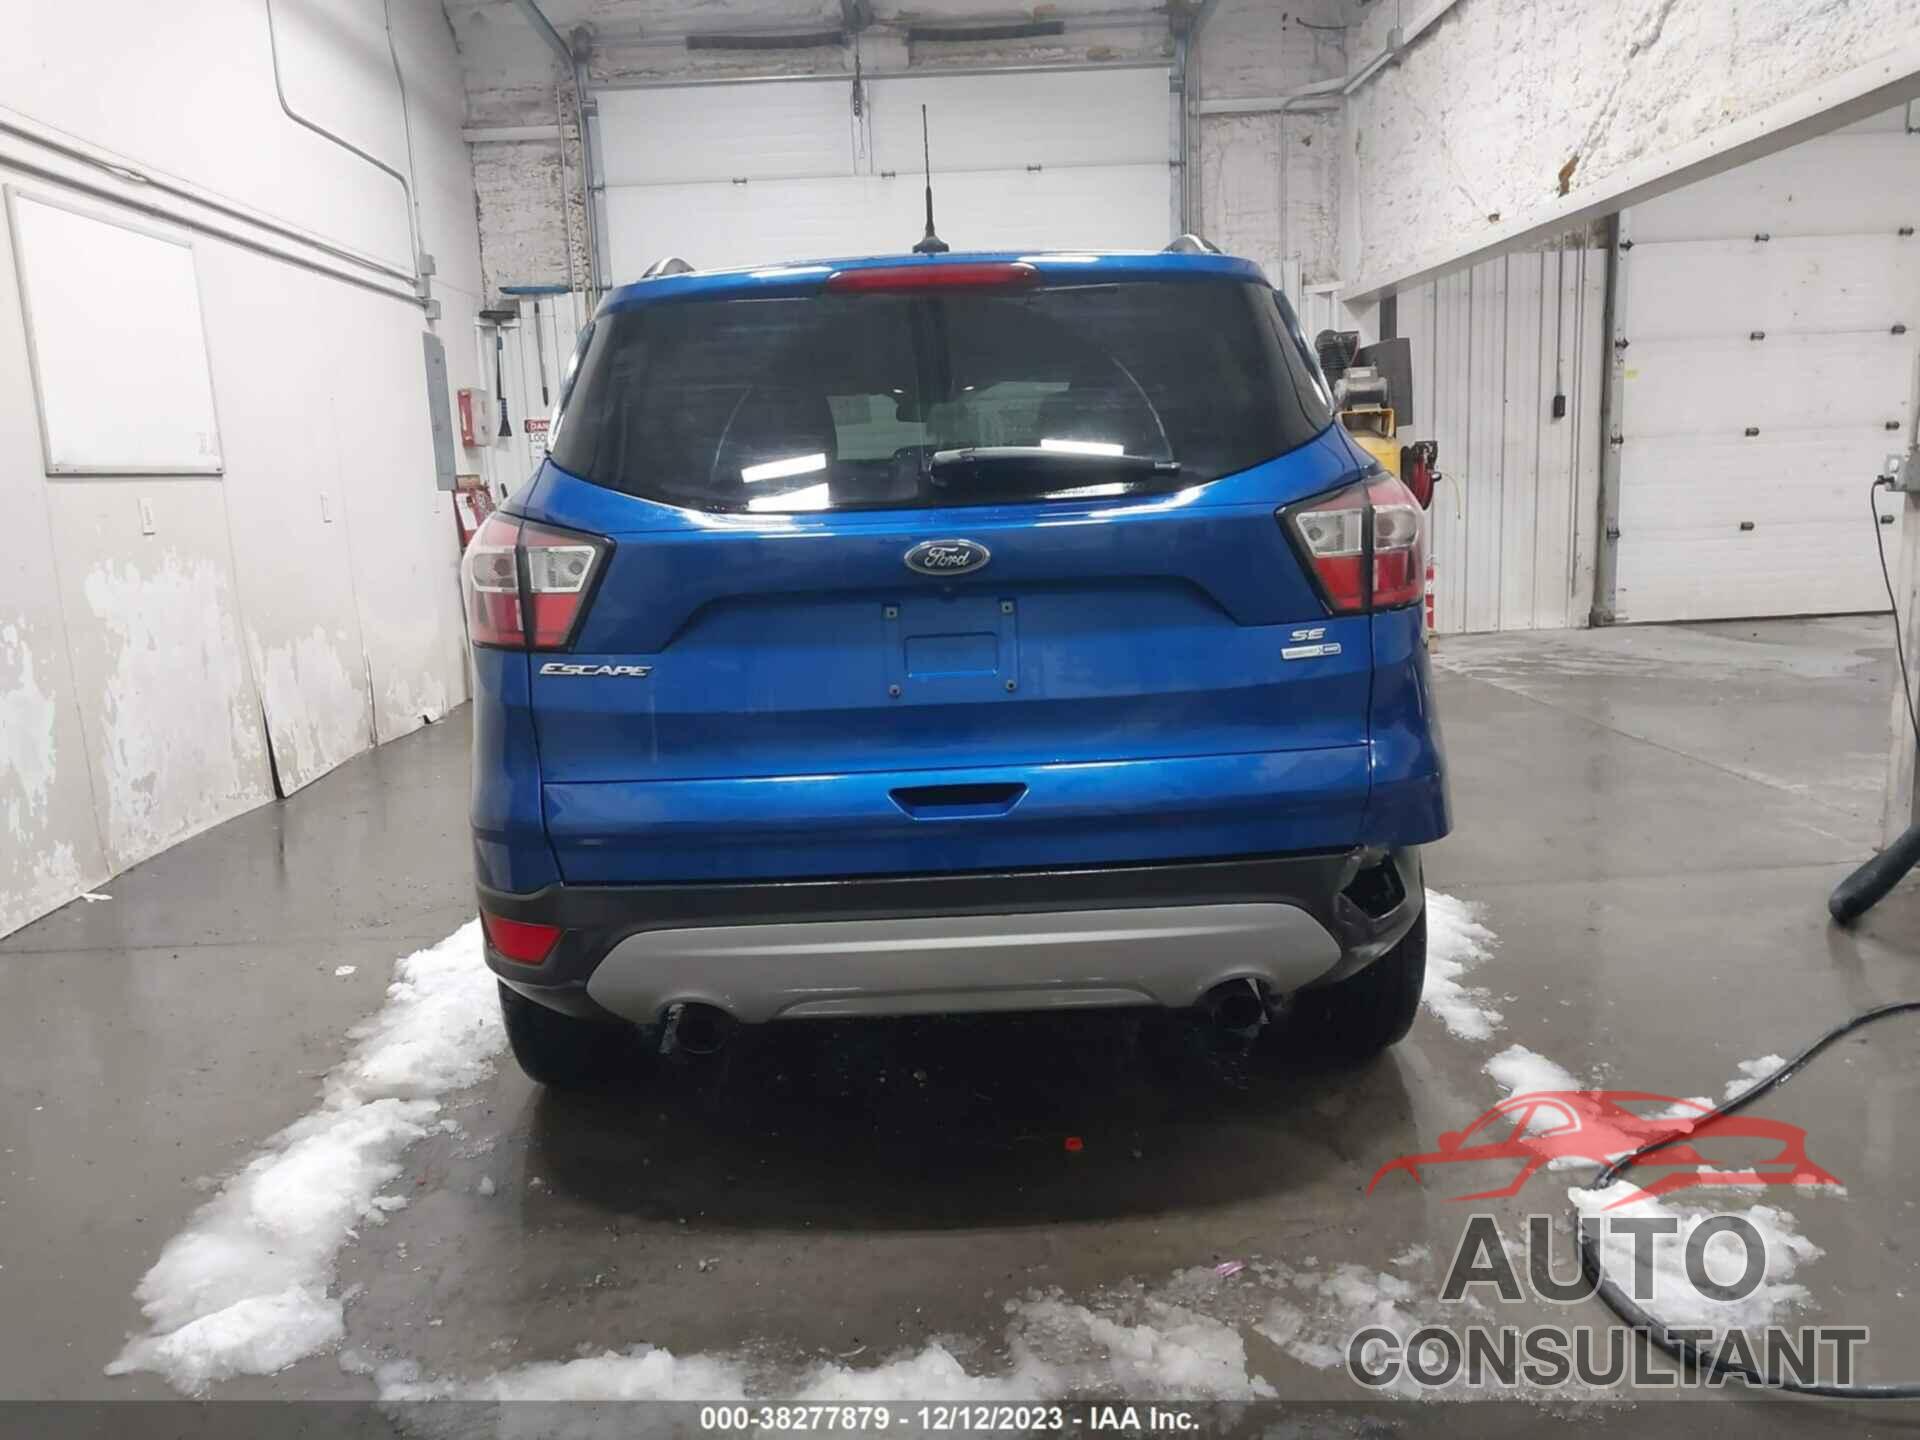 FORD ESCAPE 2018 - 1FMCU9GD2JUD51741